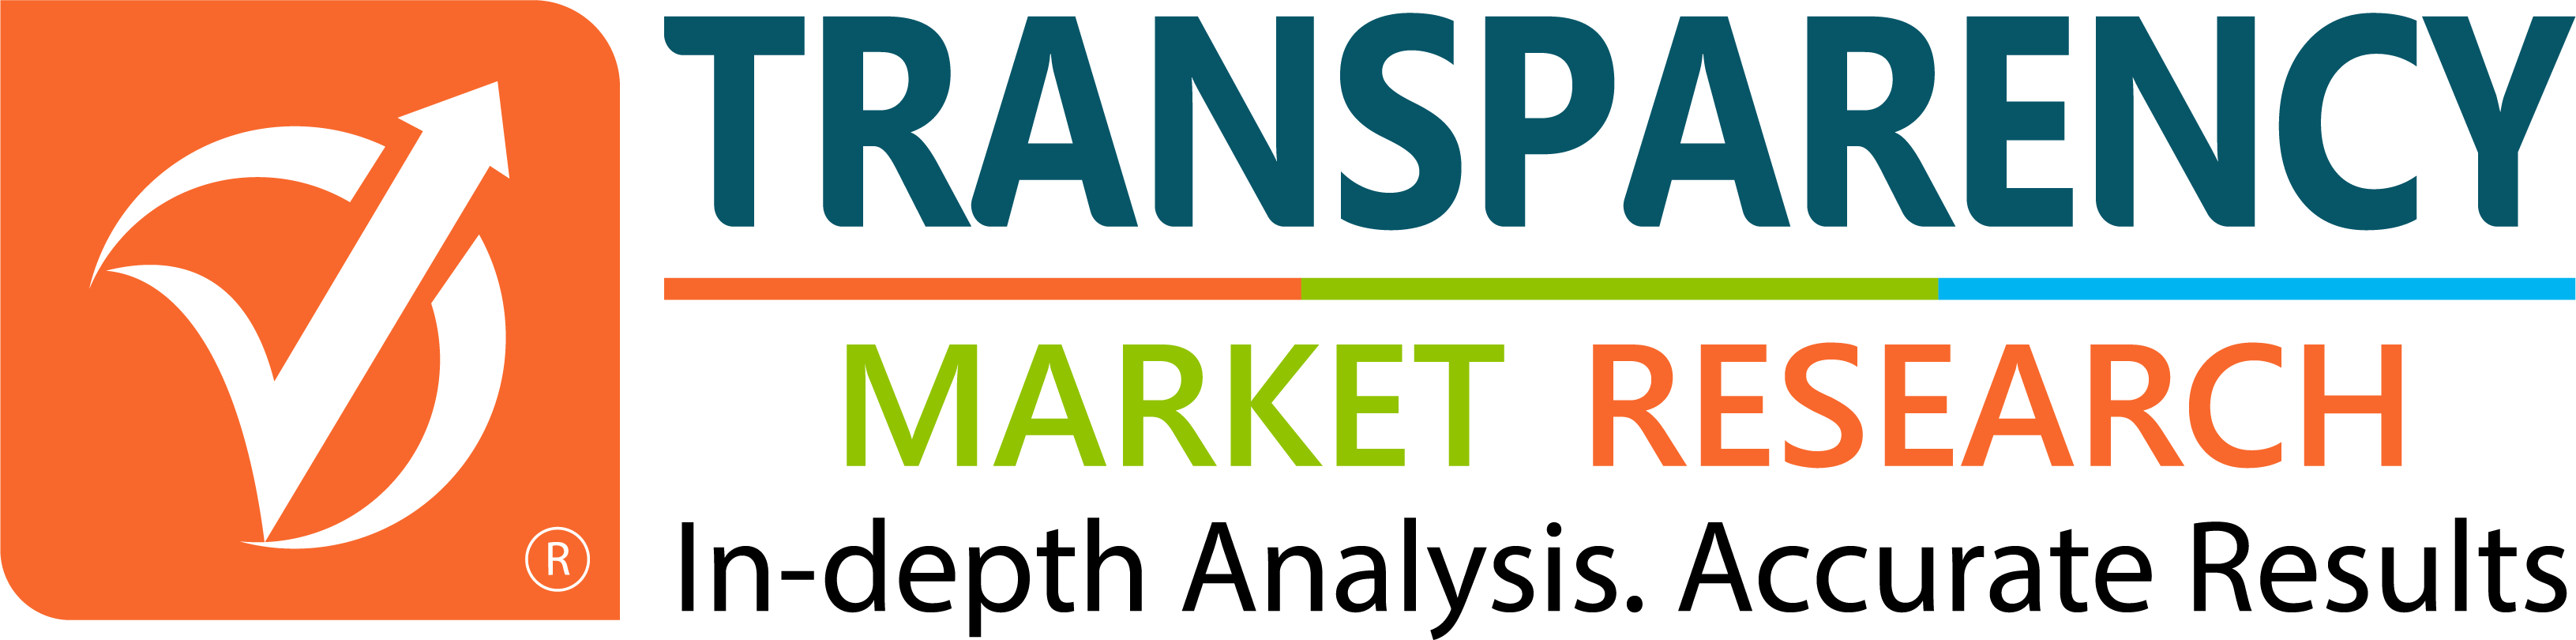 Compression Therapy Market is Predicted to Generate $5,157.4 Million by 2027, According to Transparency Market Research